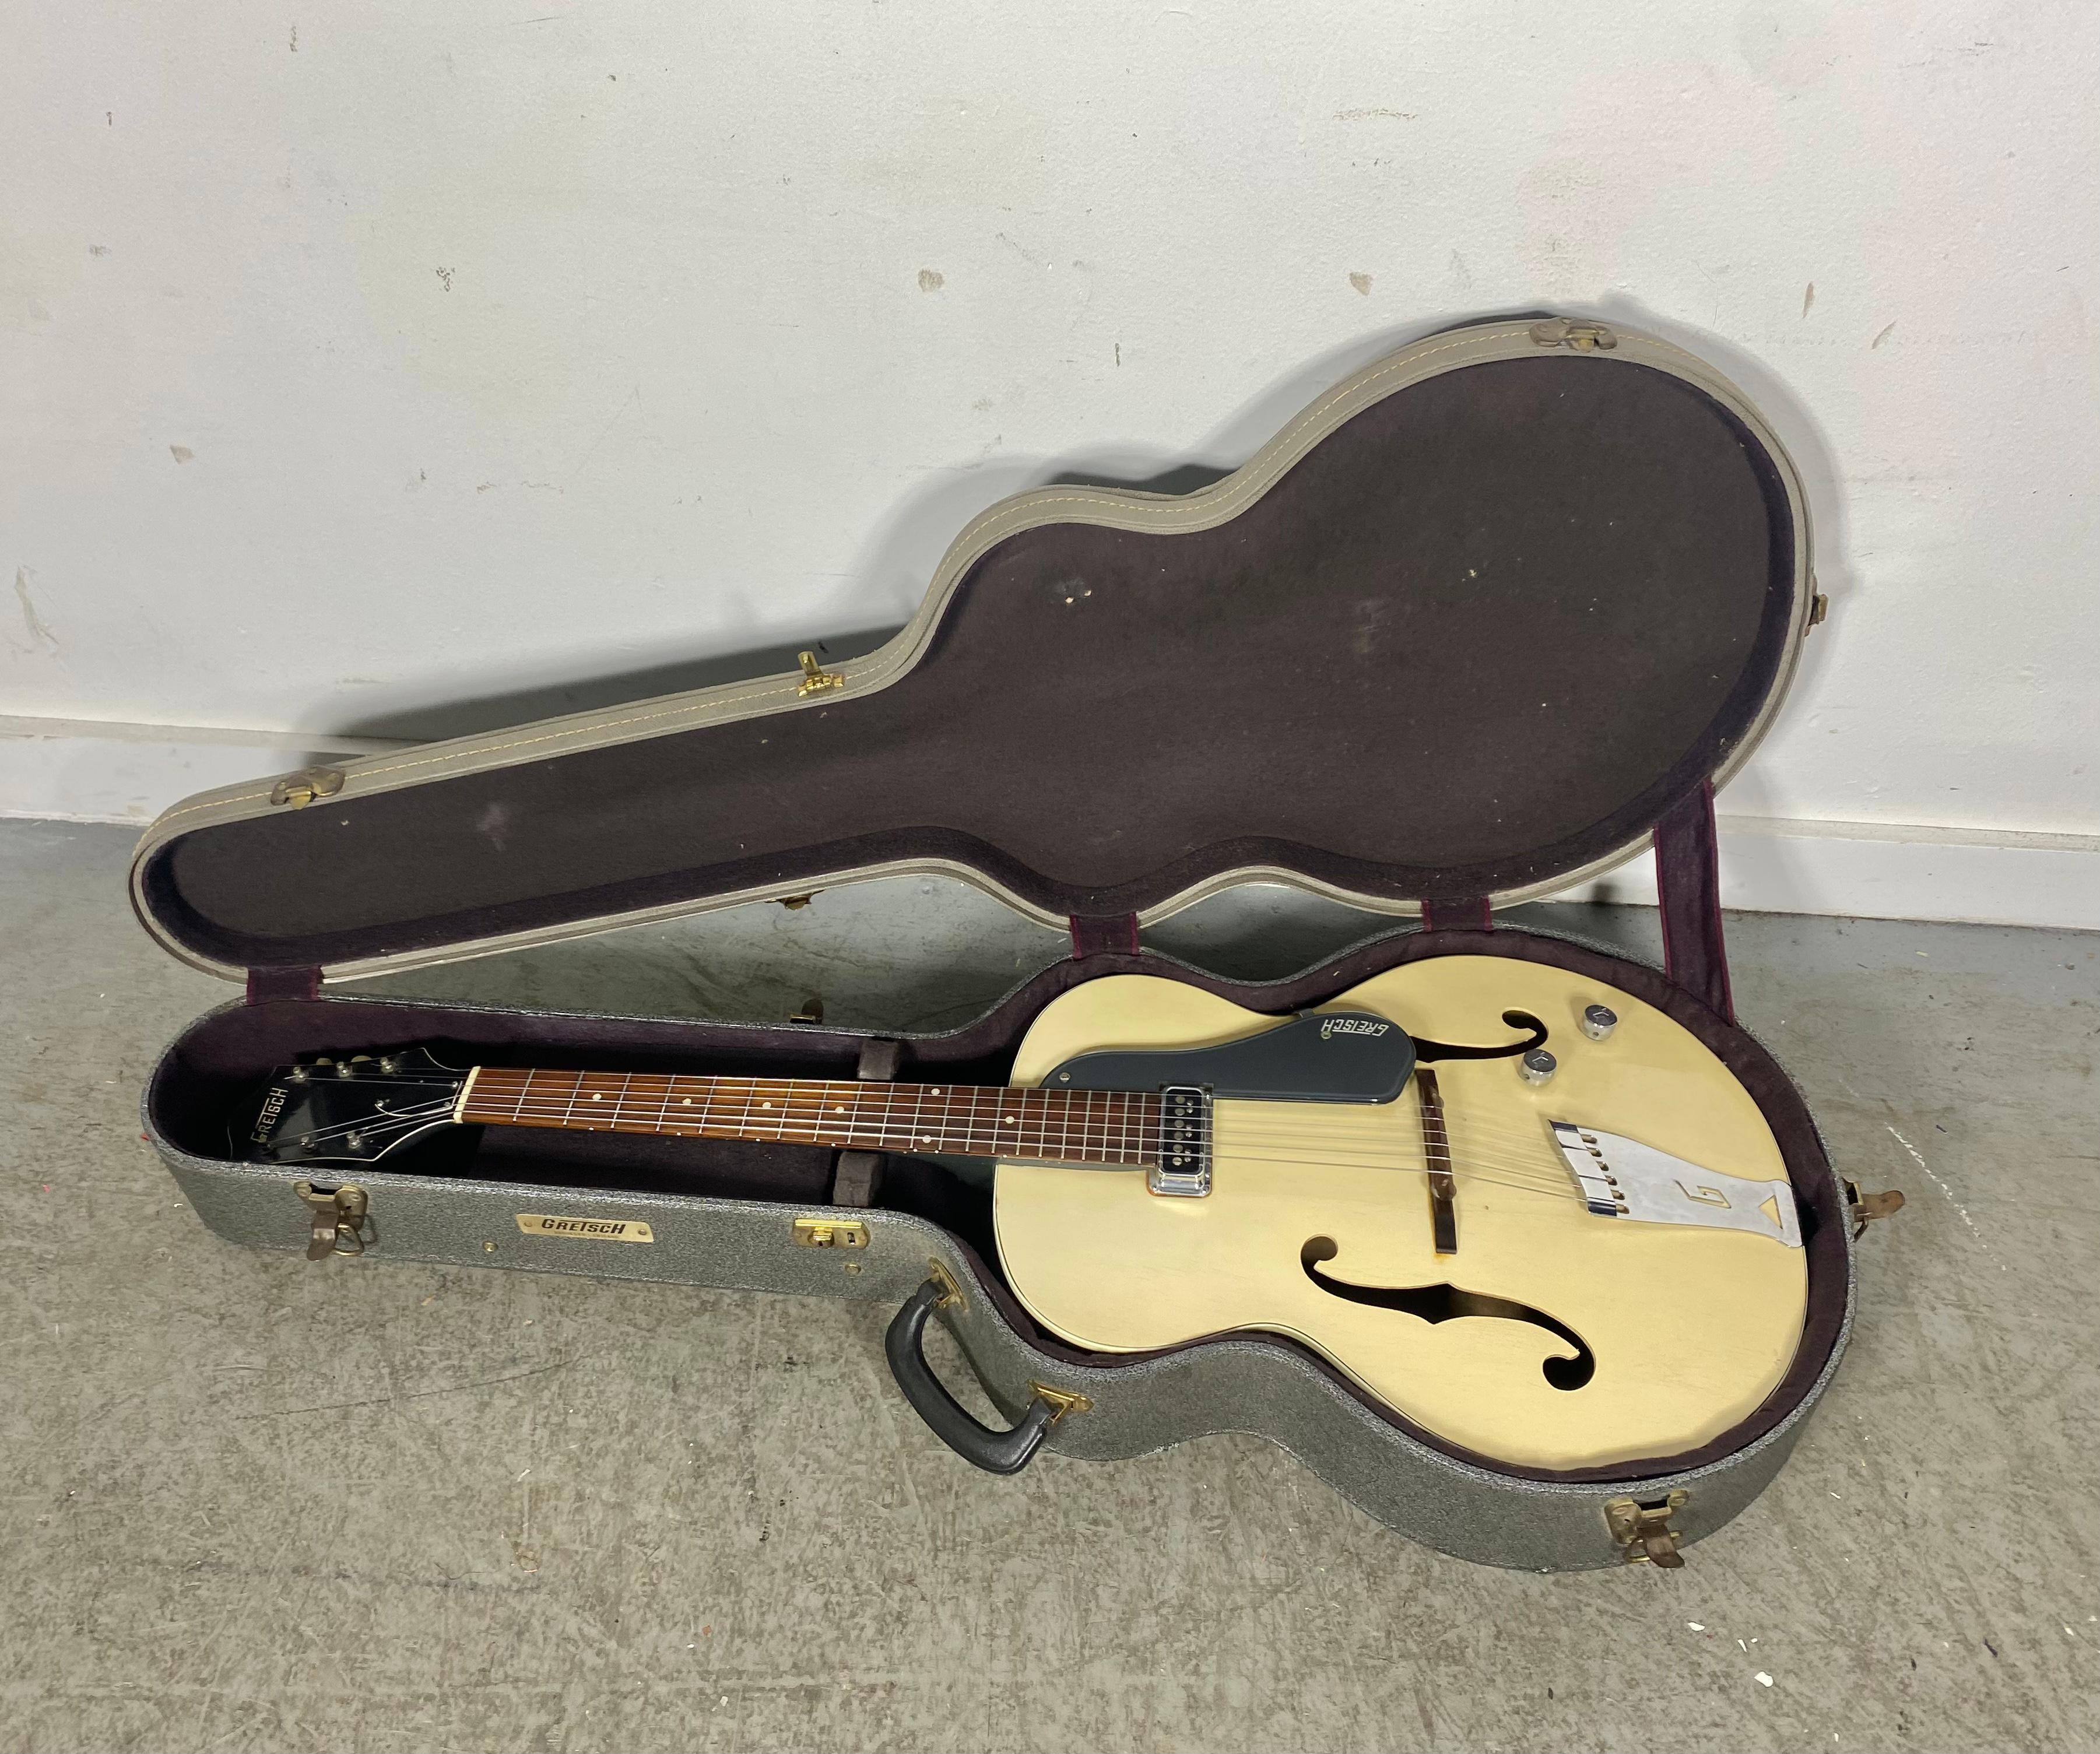 Classic Modernist design..1957 Gretsch 6187 Corvette in Lotus Ivory!
Very clean 1957 Gretsch 6187 in Lotus Ivory w/ Gray Metallic back/sides/neck.rosewood fretboard,, The model number of this guitar is a bit confusing as the model 6187 was also used